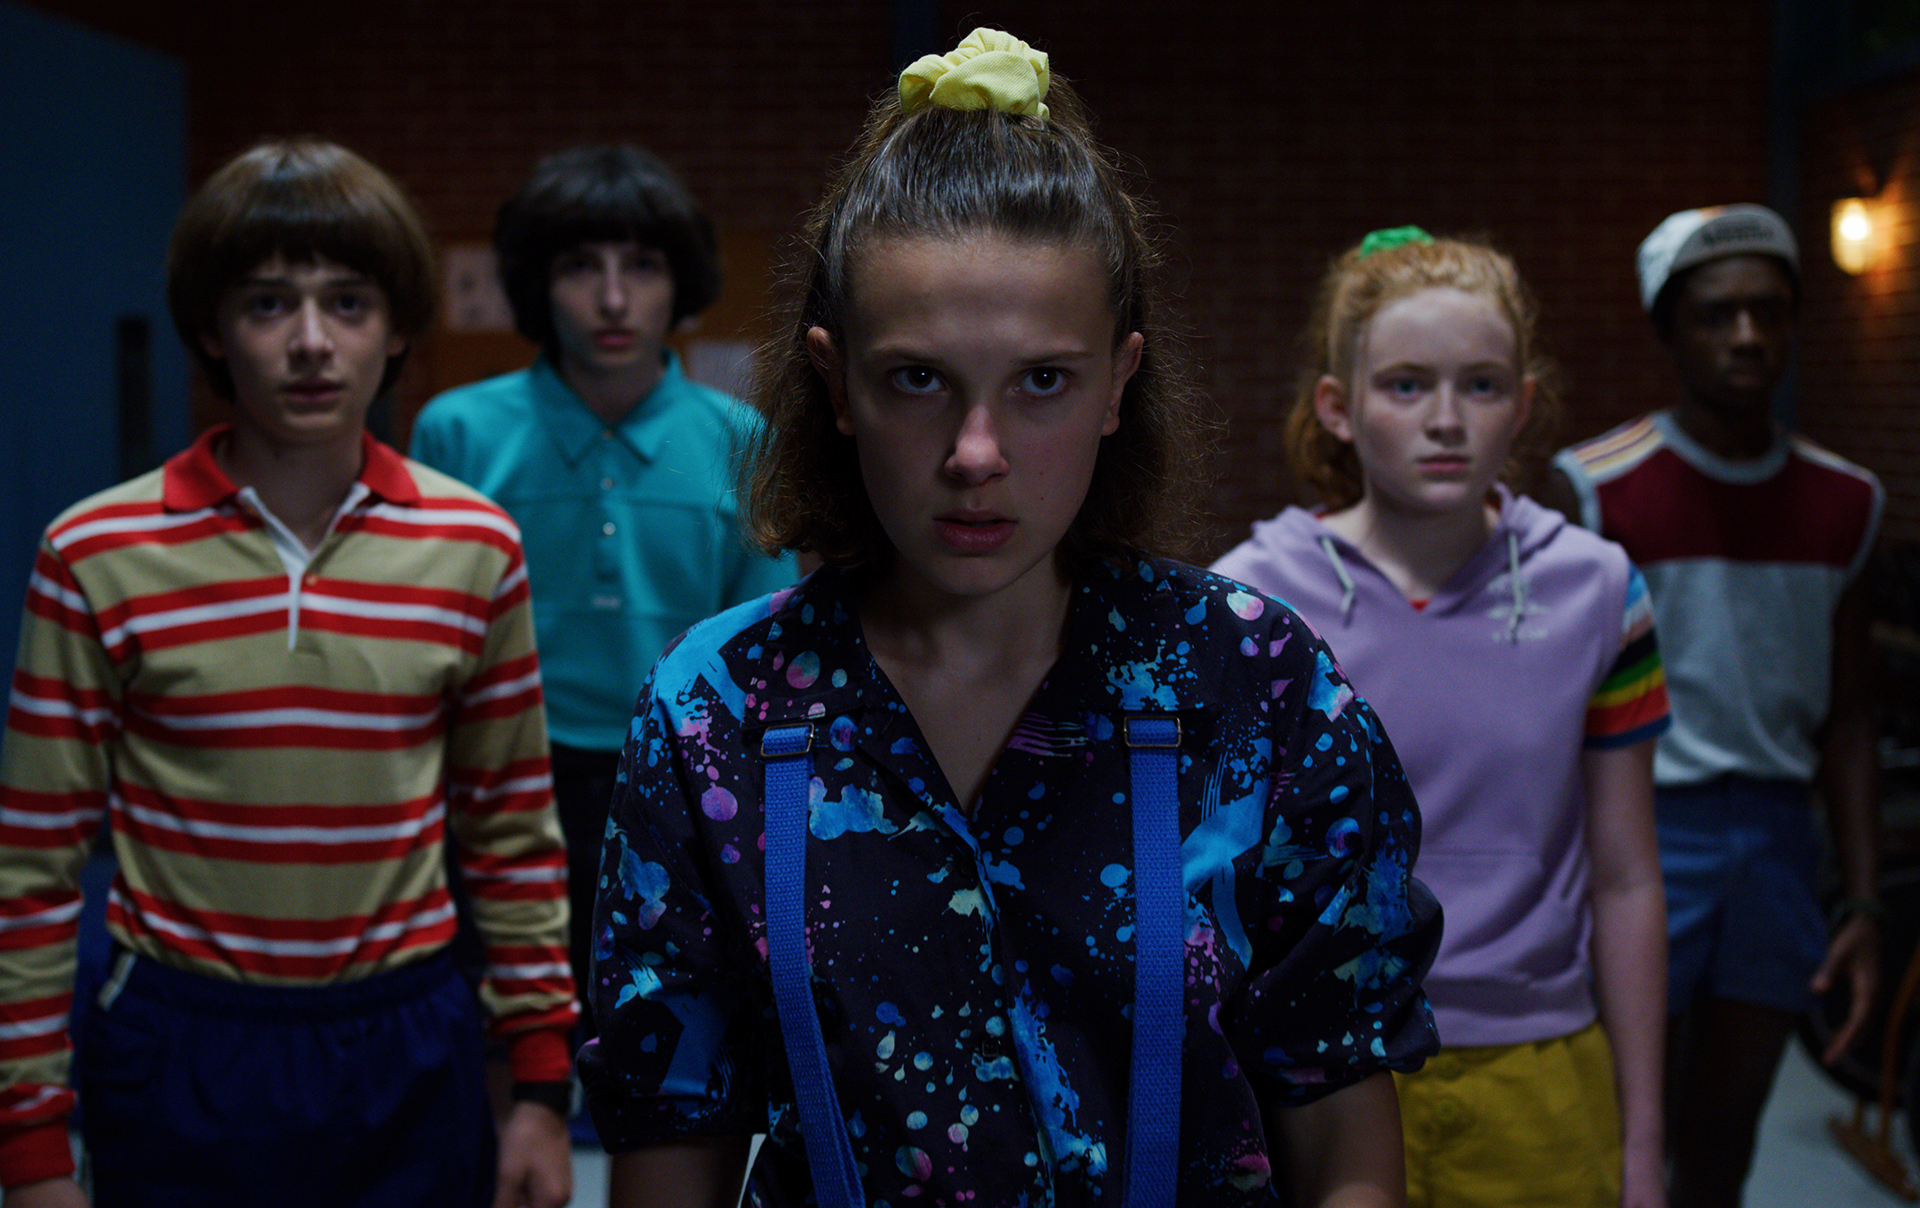 Netflix top 10: 'Stranger Things 4' Becomes The Most Viewed